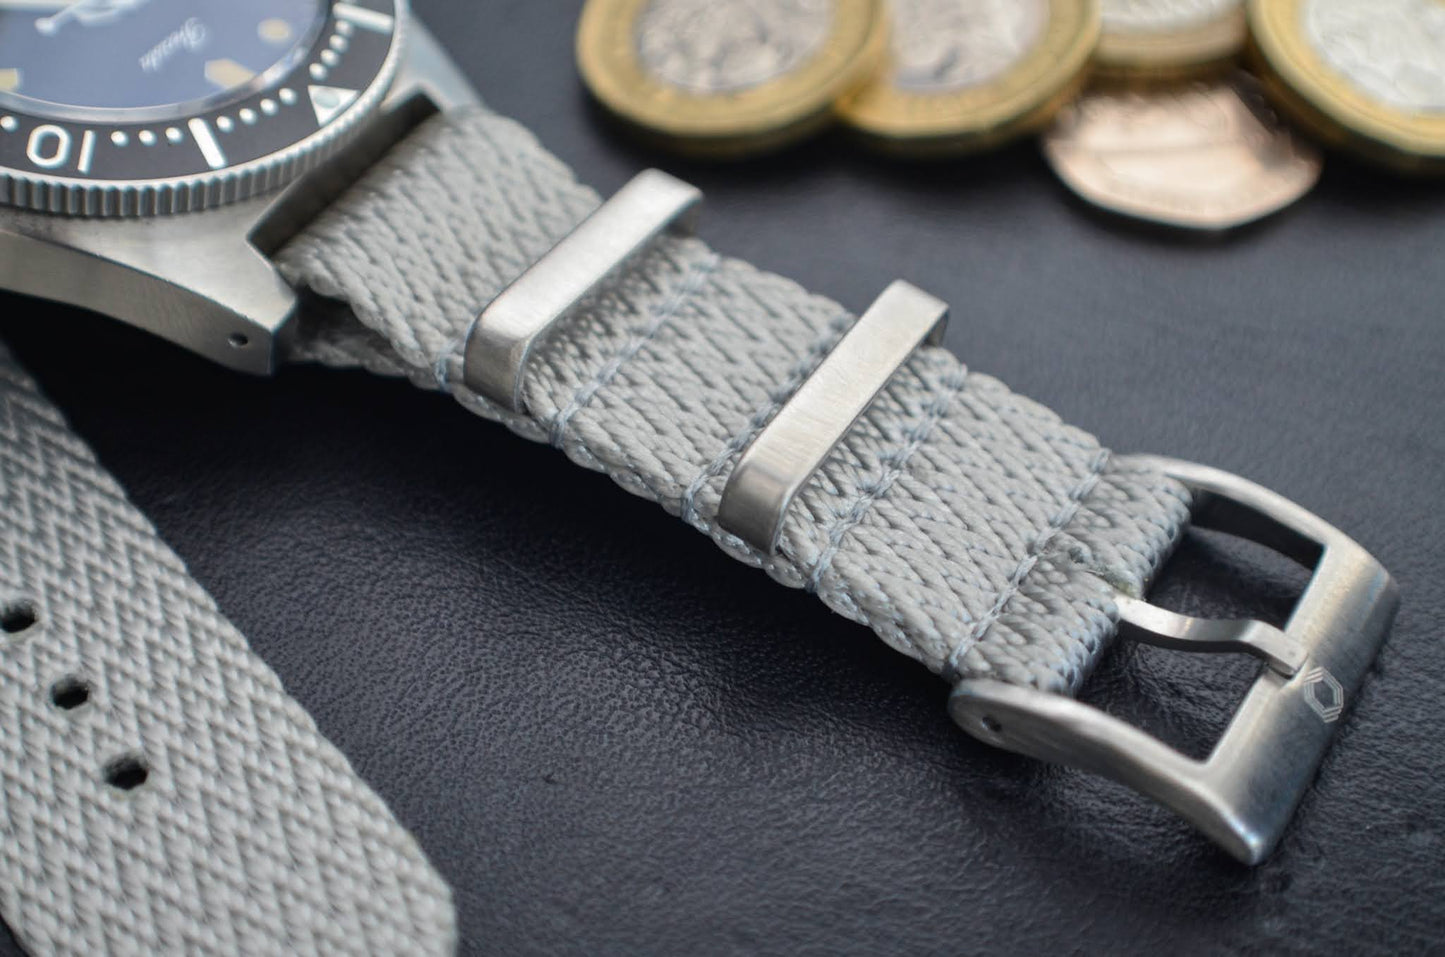 The 'Sir William' - Grey Herringbone patterned military watch strap made of a soft nylon